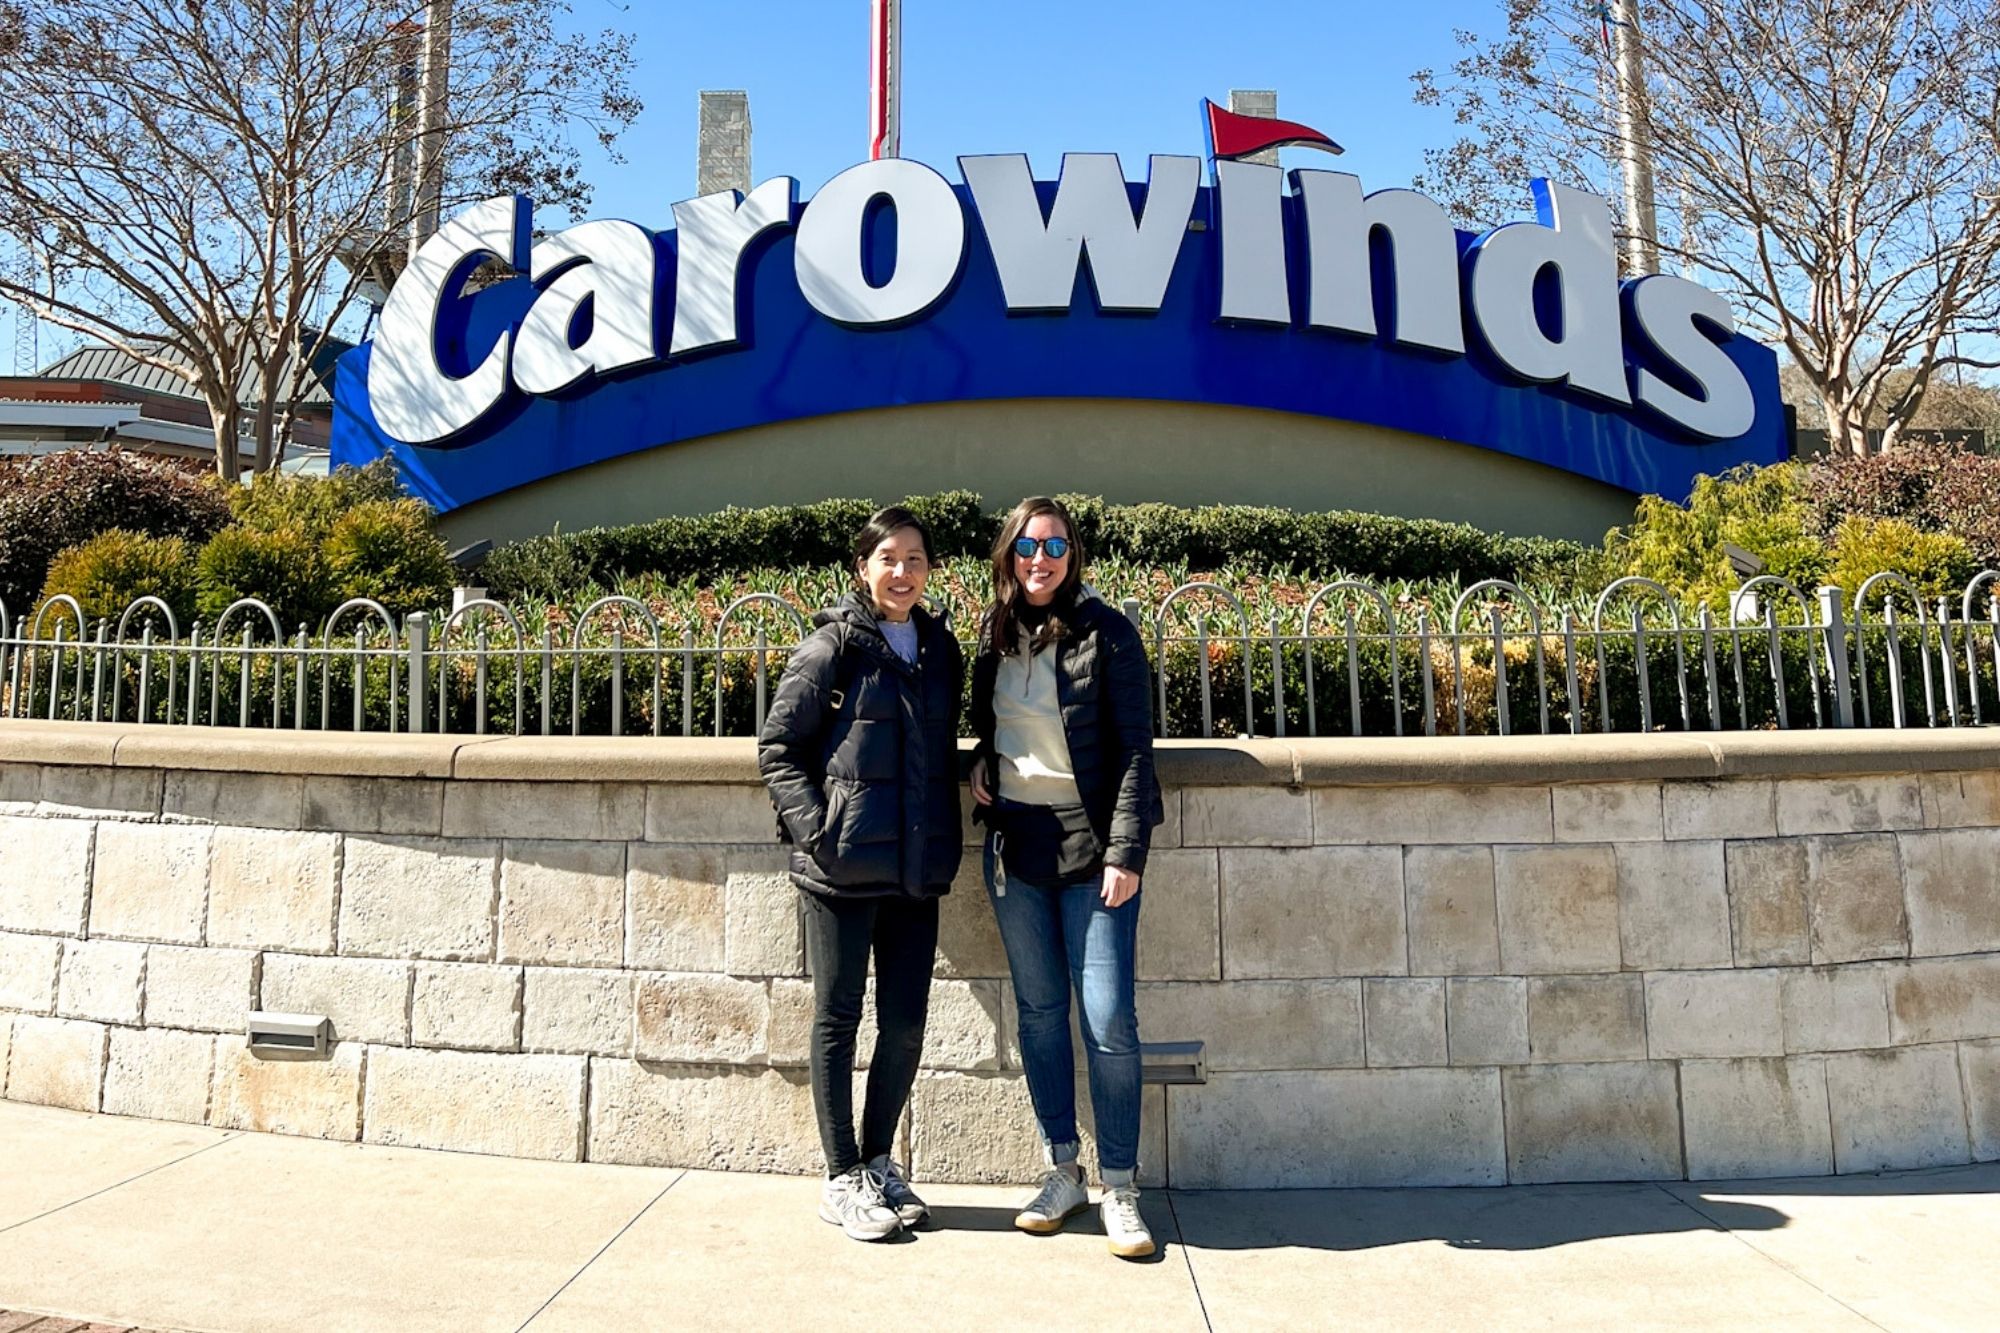 Carowinds is open for 2022! Here's what to expect this season wayward